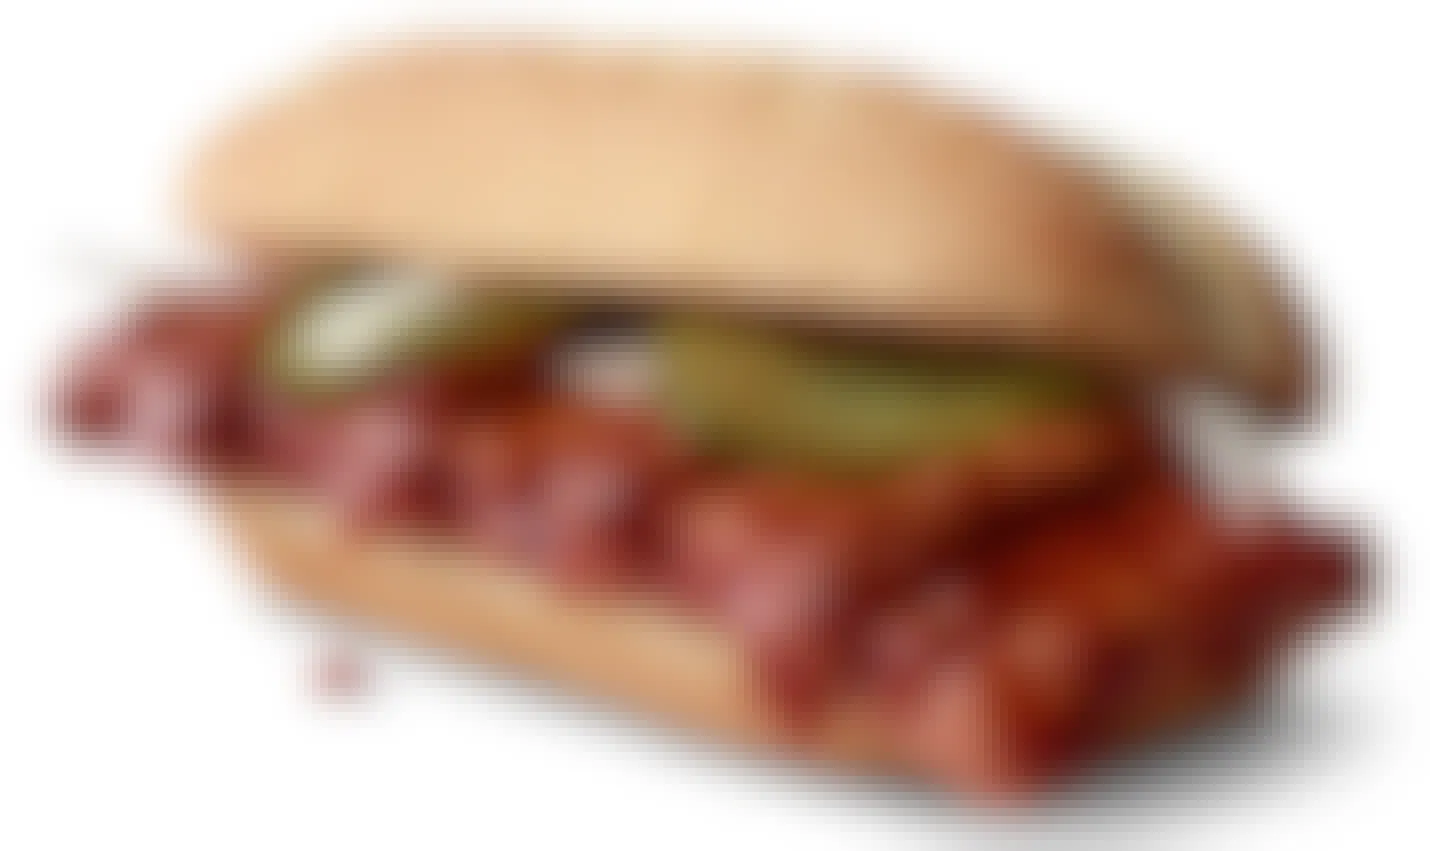 Official photo of the McRib, which is about to have its farewell tour.